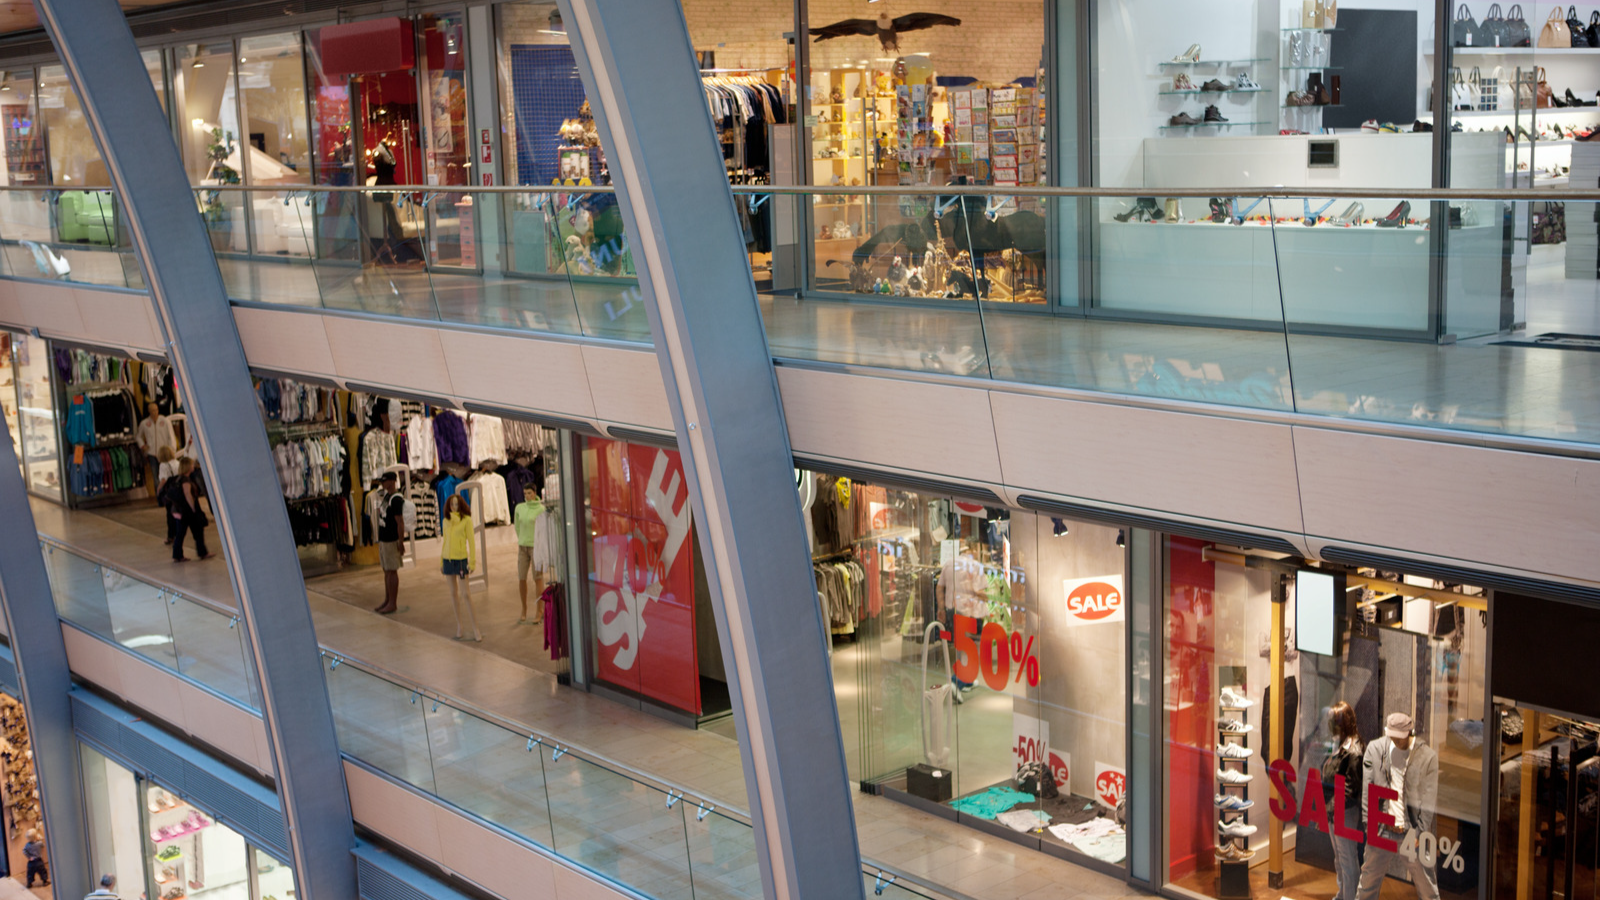 Inside Mall View of Stores